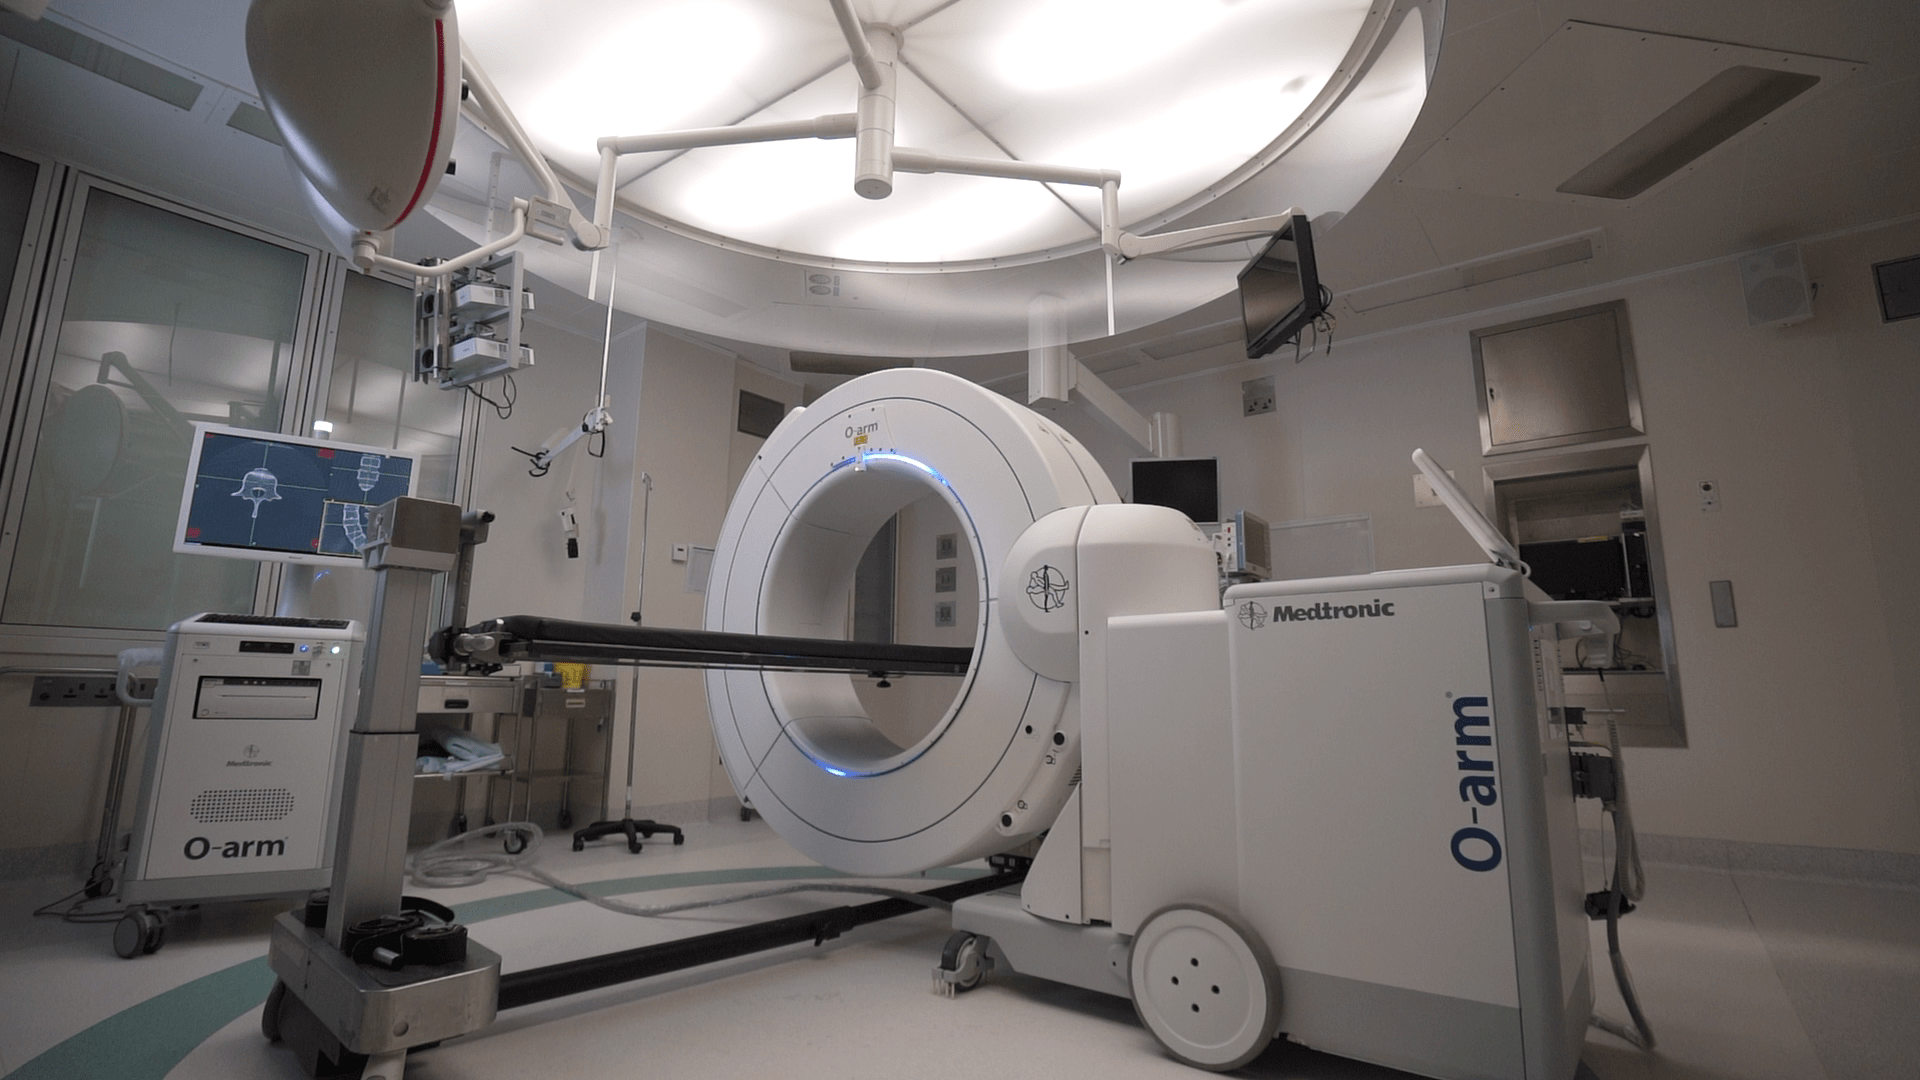 Prince Court set to transform brain and spine surgeries with O-Arm Imaging & Navigation System